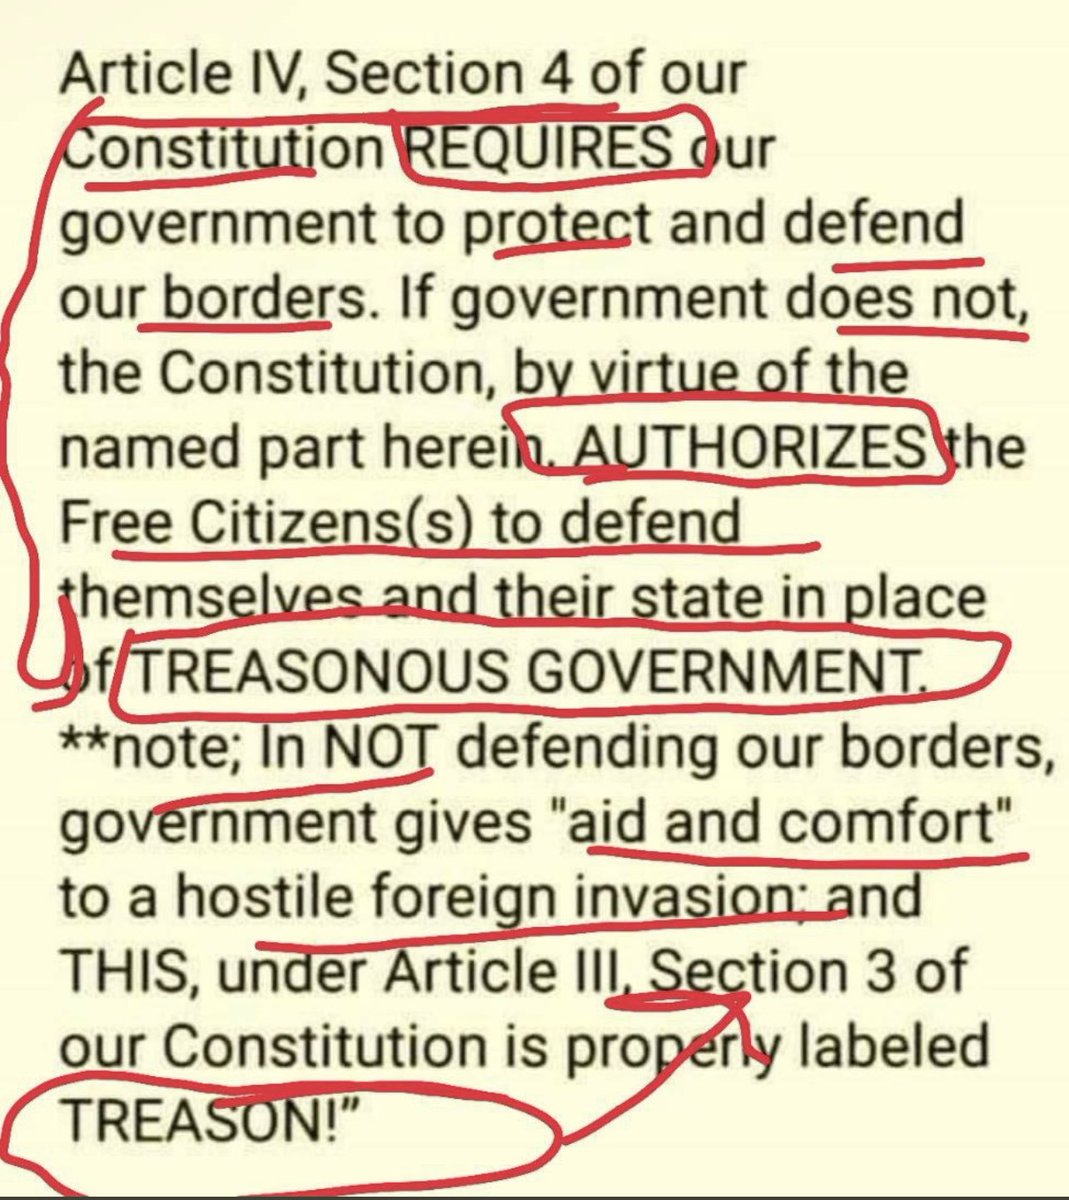 Oh, this is an invasion alright. It’s also TREASON. Our Constitution states this VERY clearly. @POTUS you need removed from the “office” you were installed in. I’m beyond wanting you impeached, you aren’t legitimate so how would that work anyway? You need a Military tribunal, and…